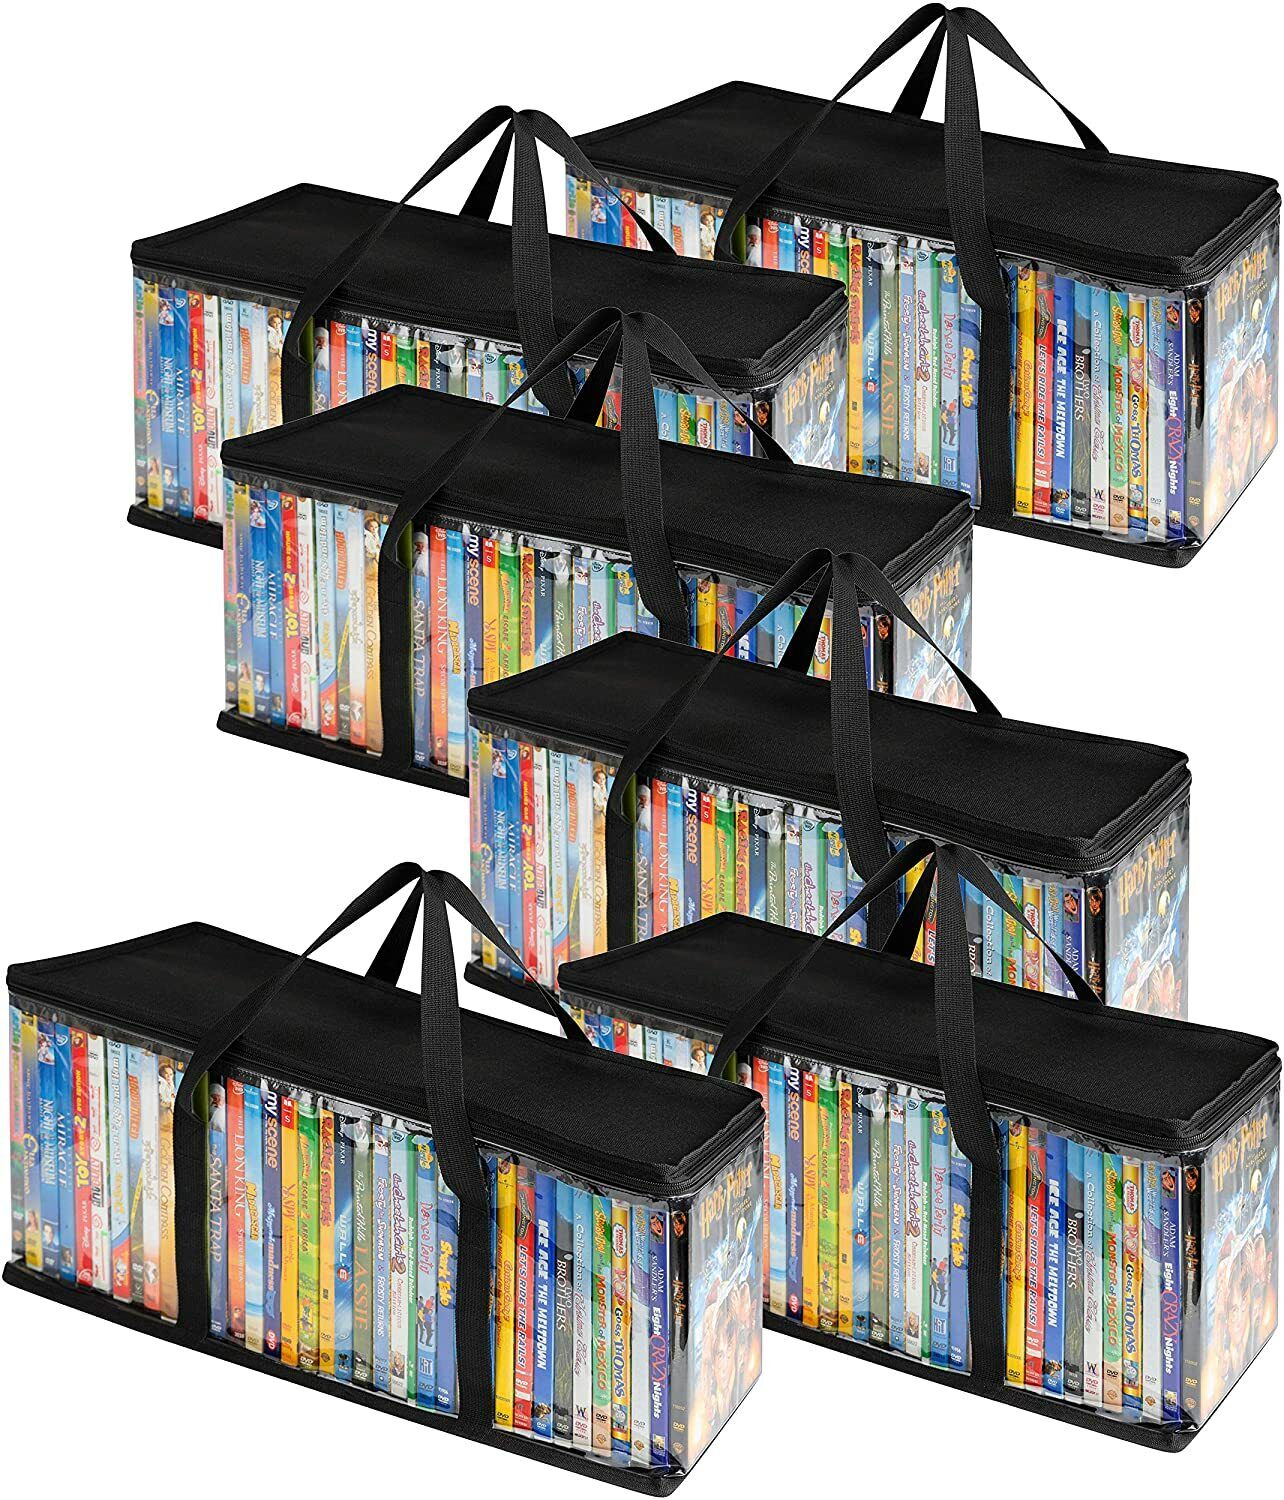 Stock Your Home DVD Storage Bags - 6 Count